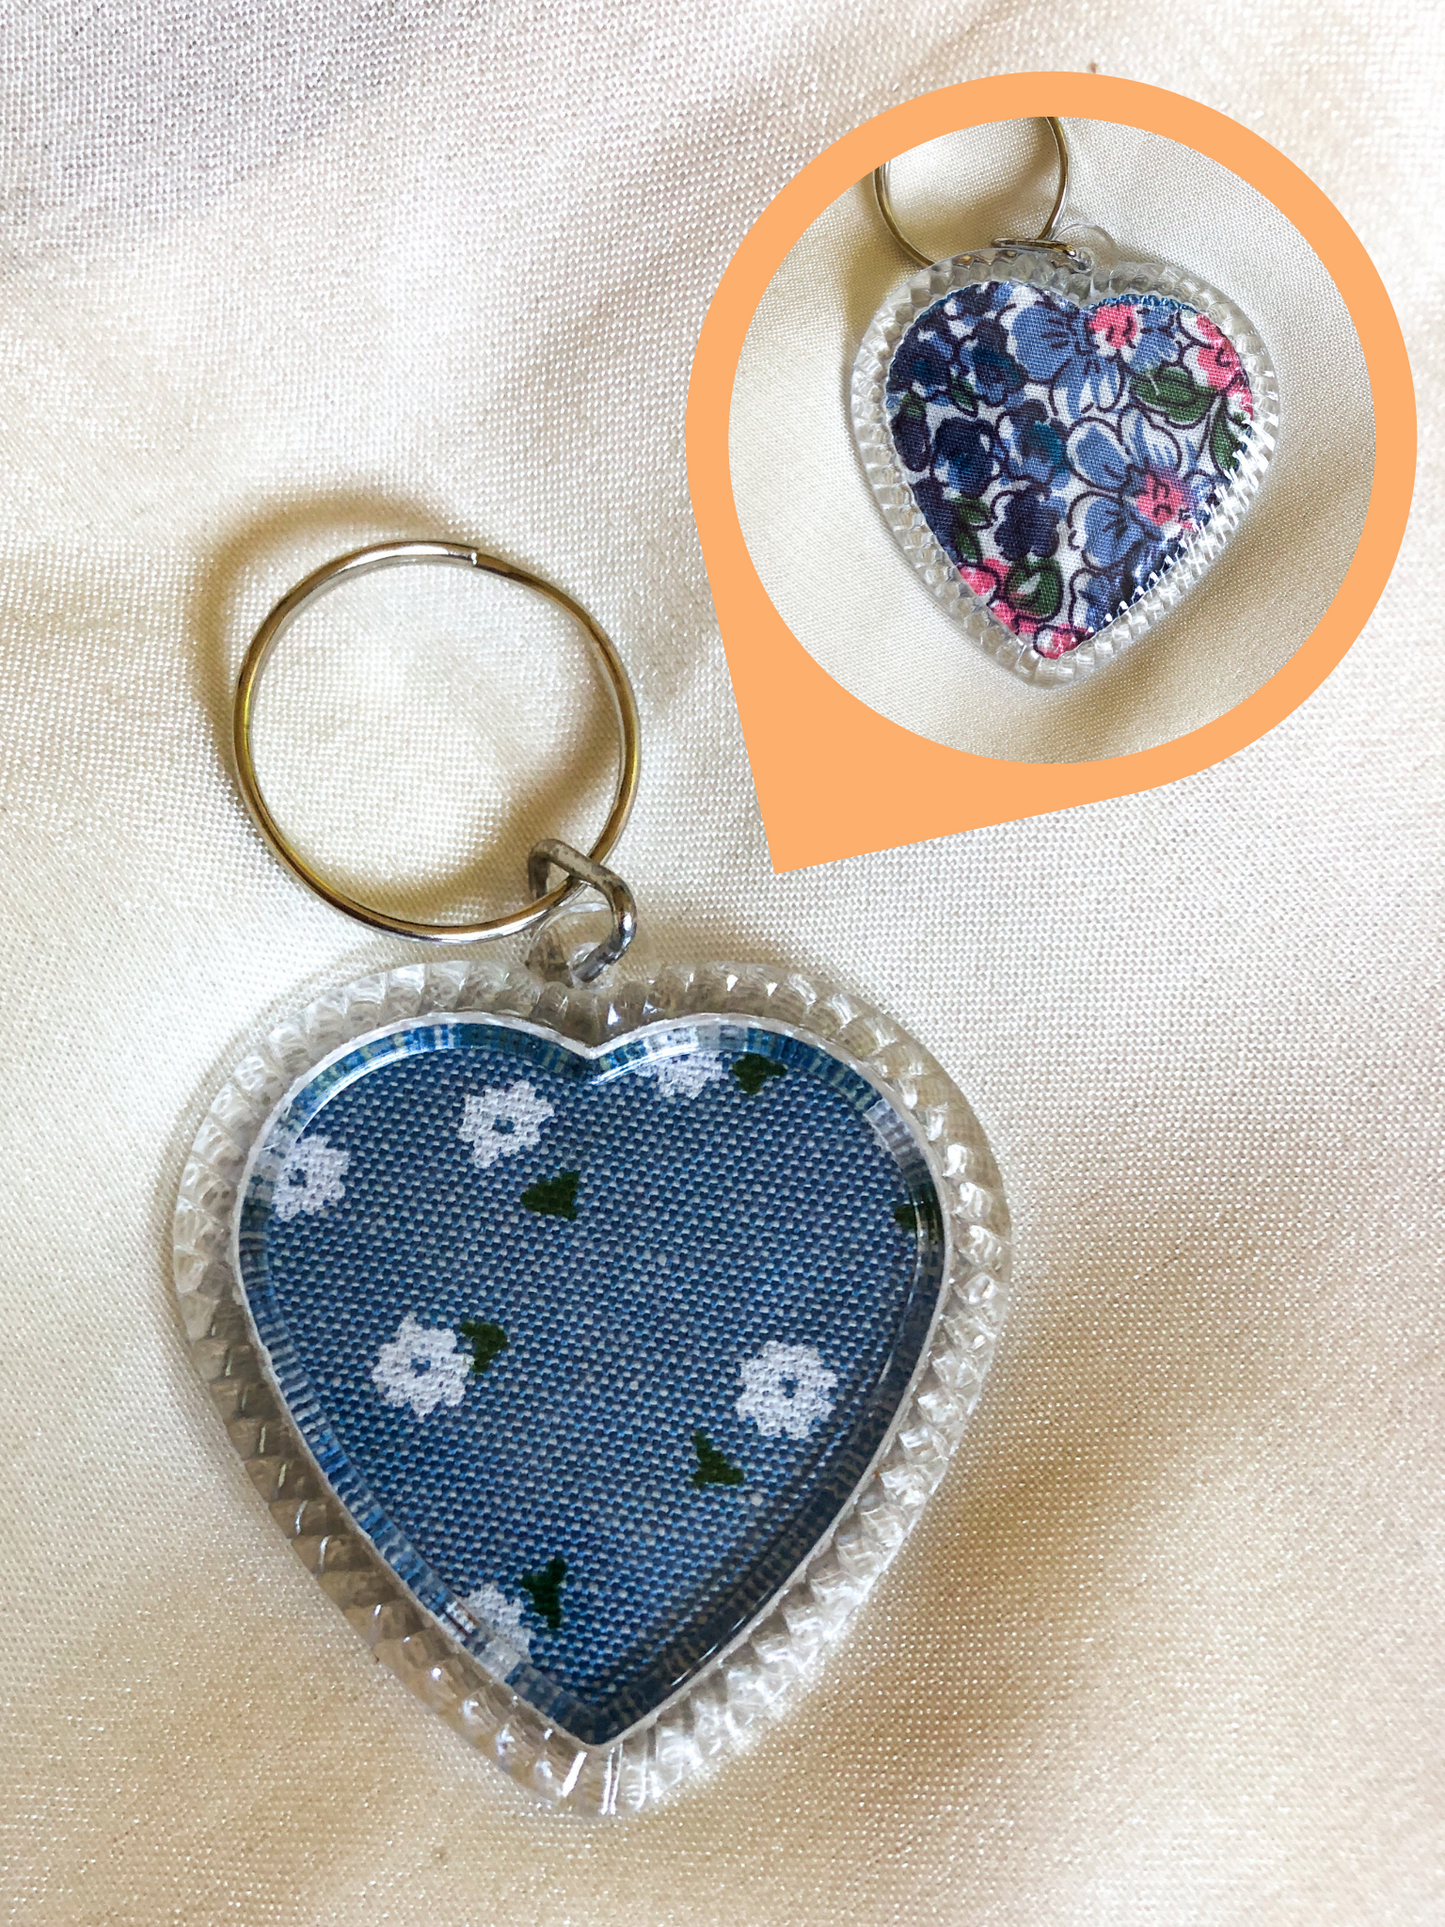 Heart Shaped Keyring - Blue and Denim Floral - Upcycled - Duo Design